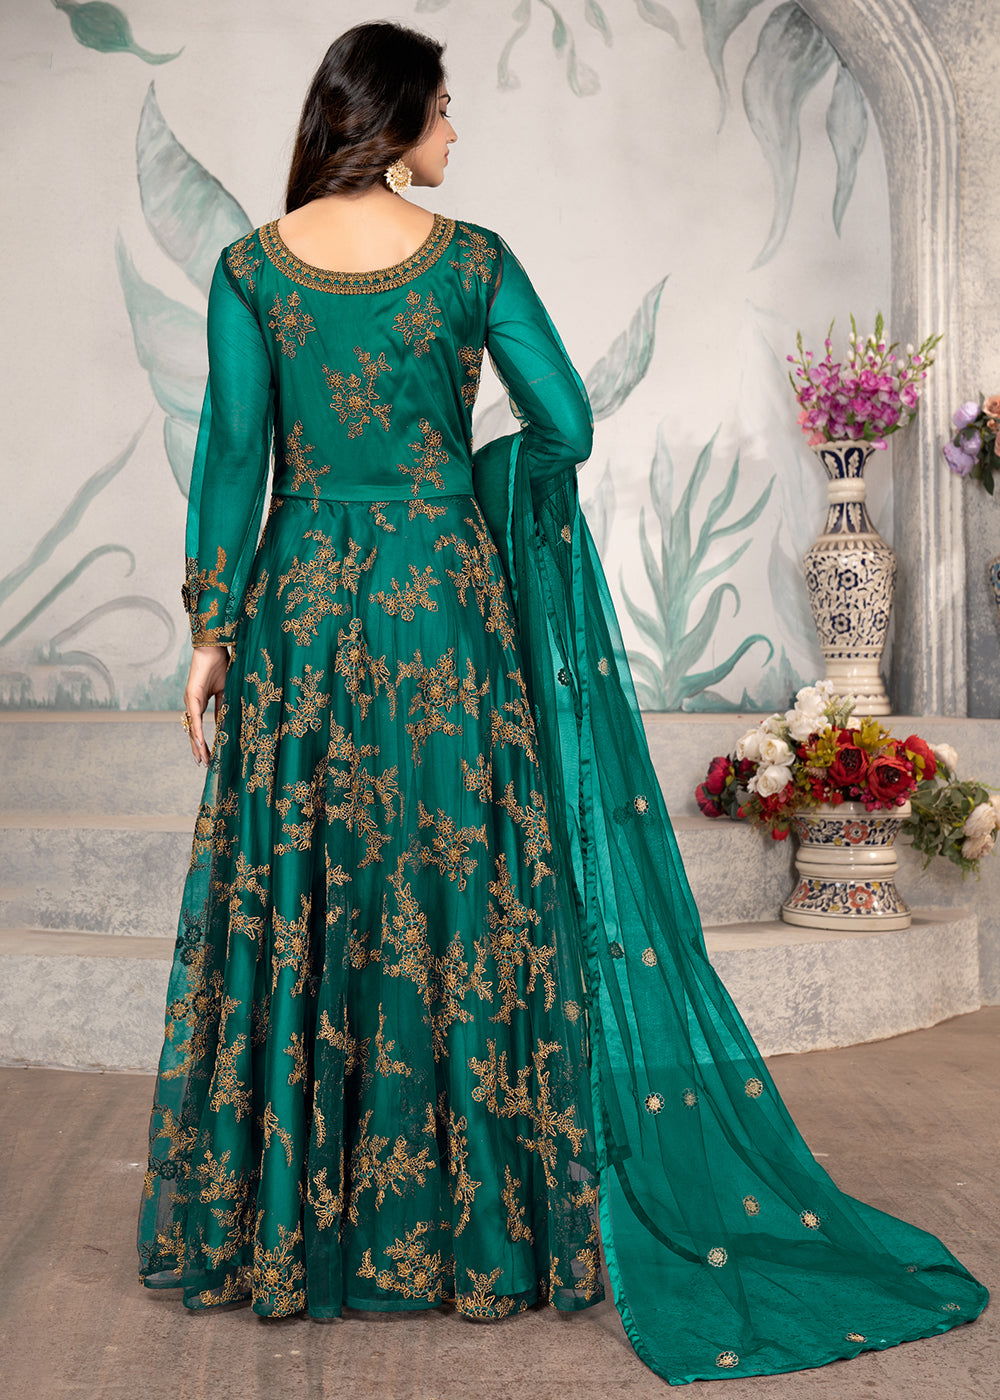 Buy Now Party Wear Green Thread & Sequins Work Anarkali Suit Online in USA, UK, Australia, New Zealand, Canada, Italy & Worldwide at Empress Clothing.